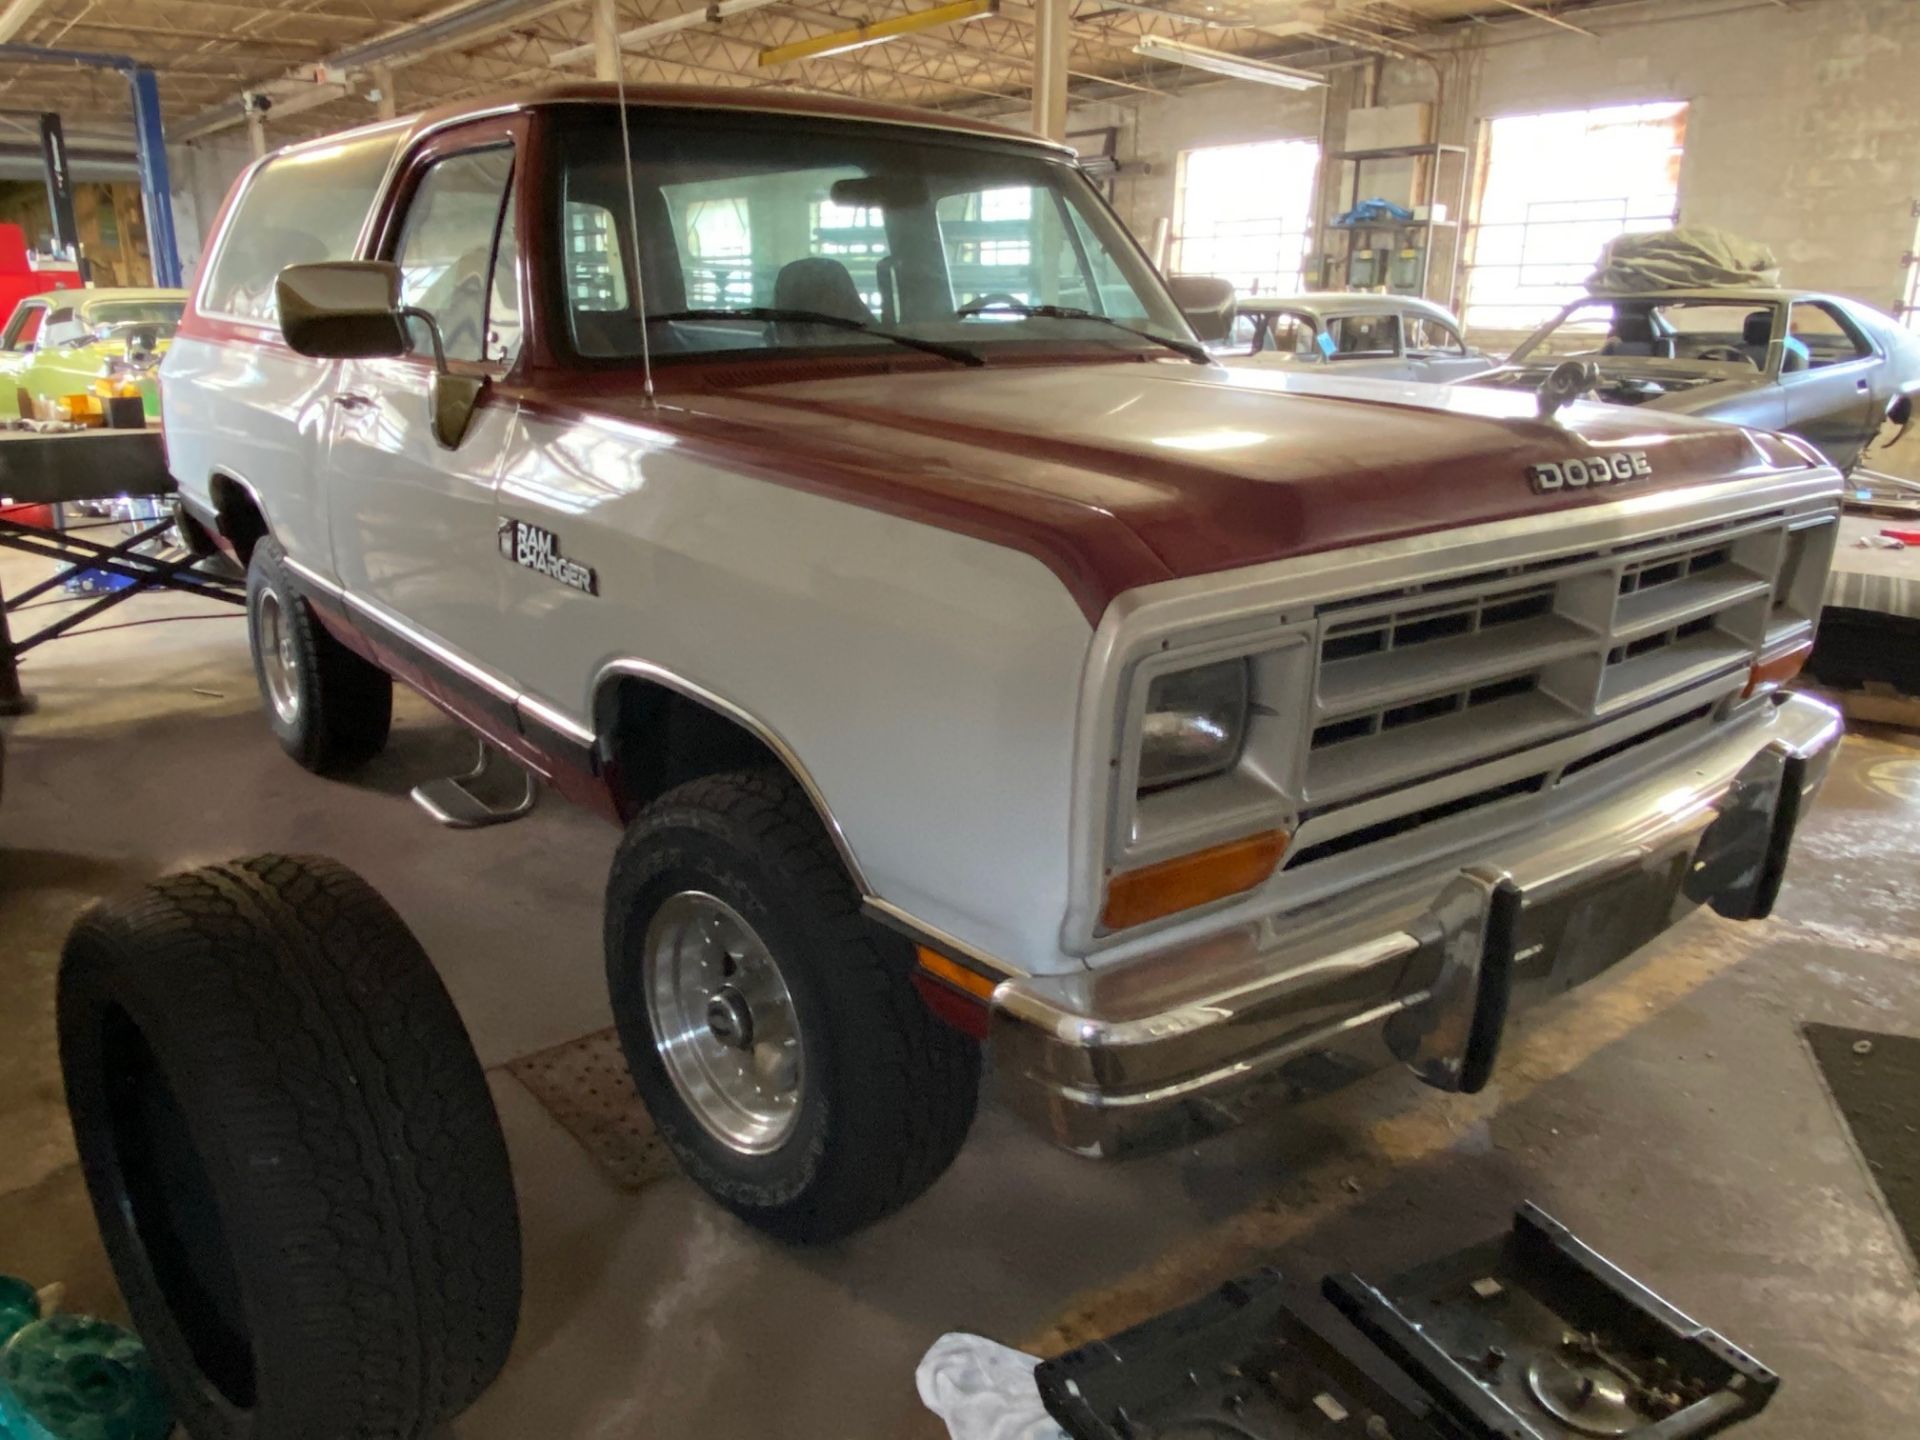 1990 Dodge Ram Charger 4x4, Super Clean No Rust, Runs and Drives Great, 360 V8 Engine - Image 5 of 15